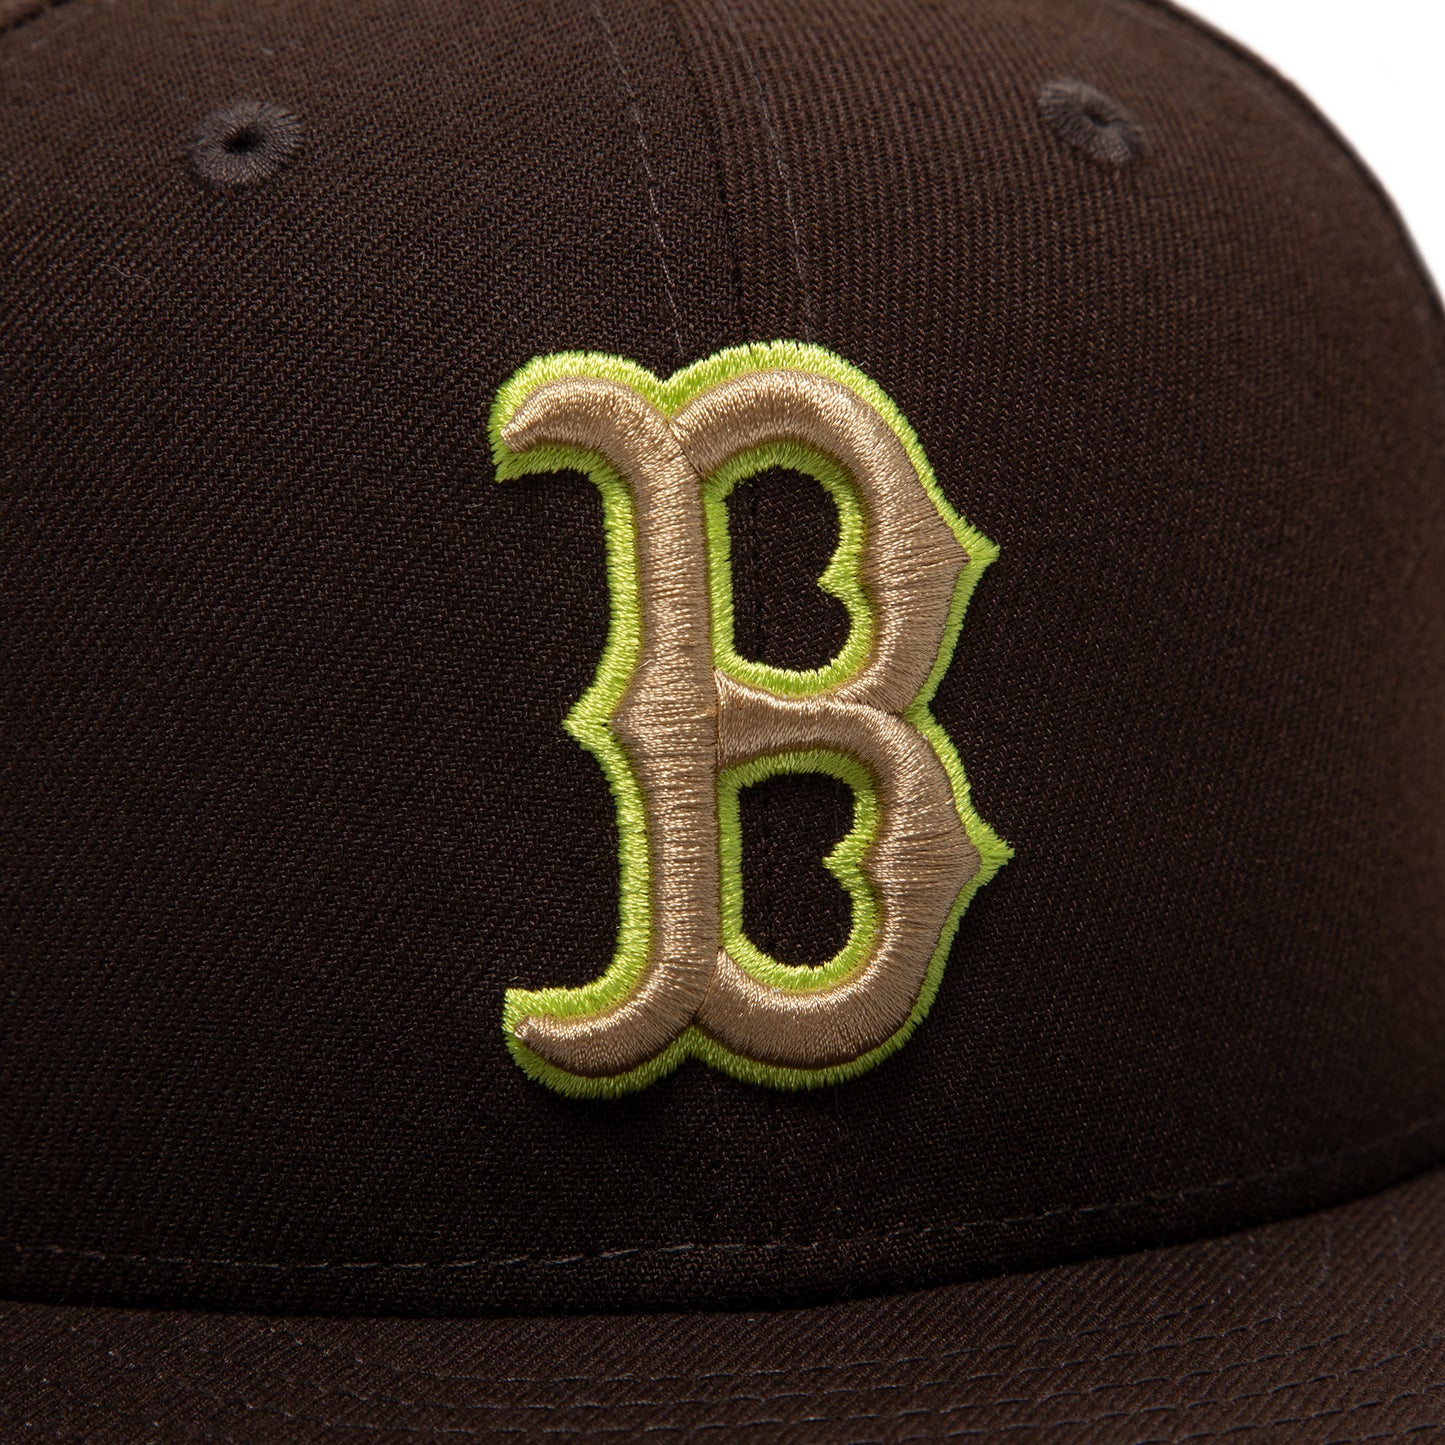 Concepts x New Era 5950 Boston Red Sox Fitted Hat (Burnt Wood)